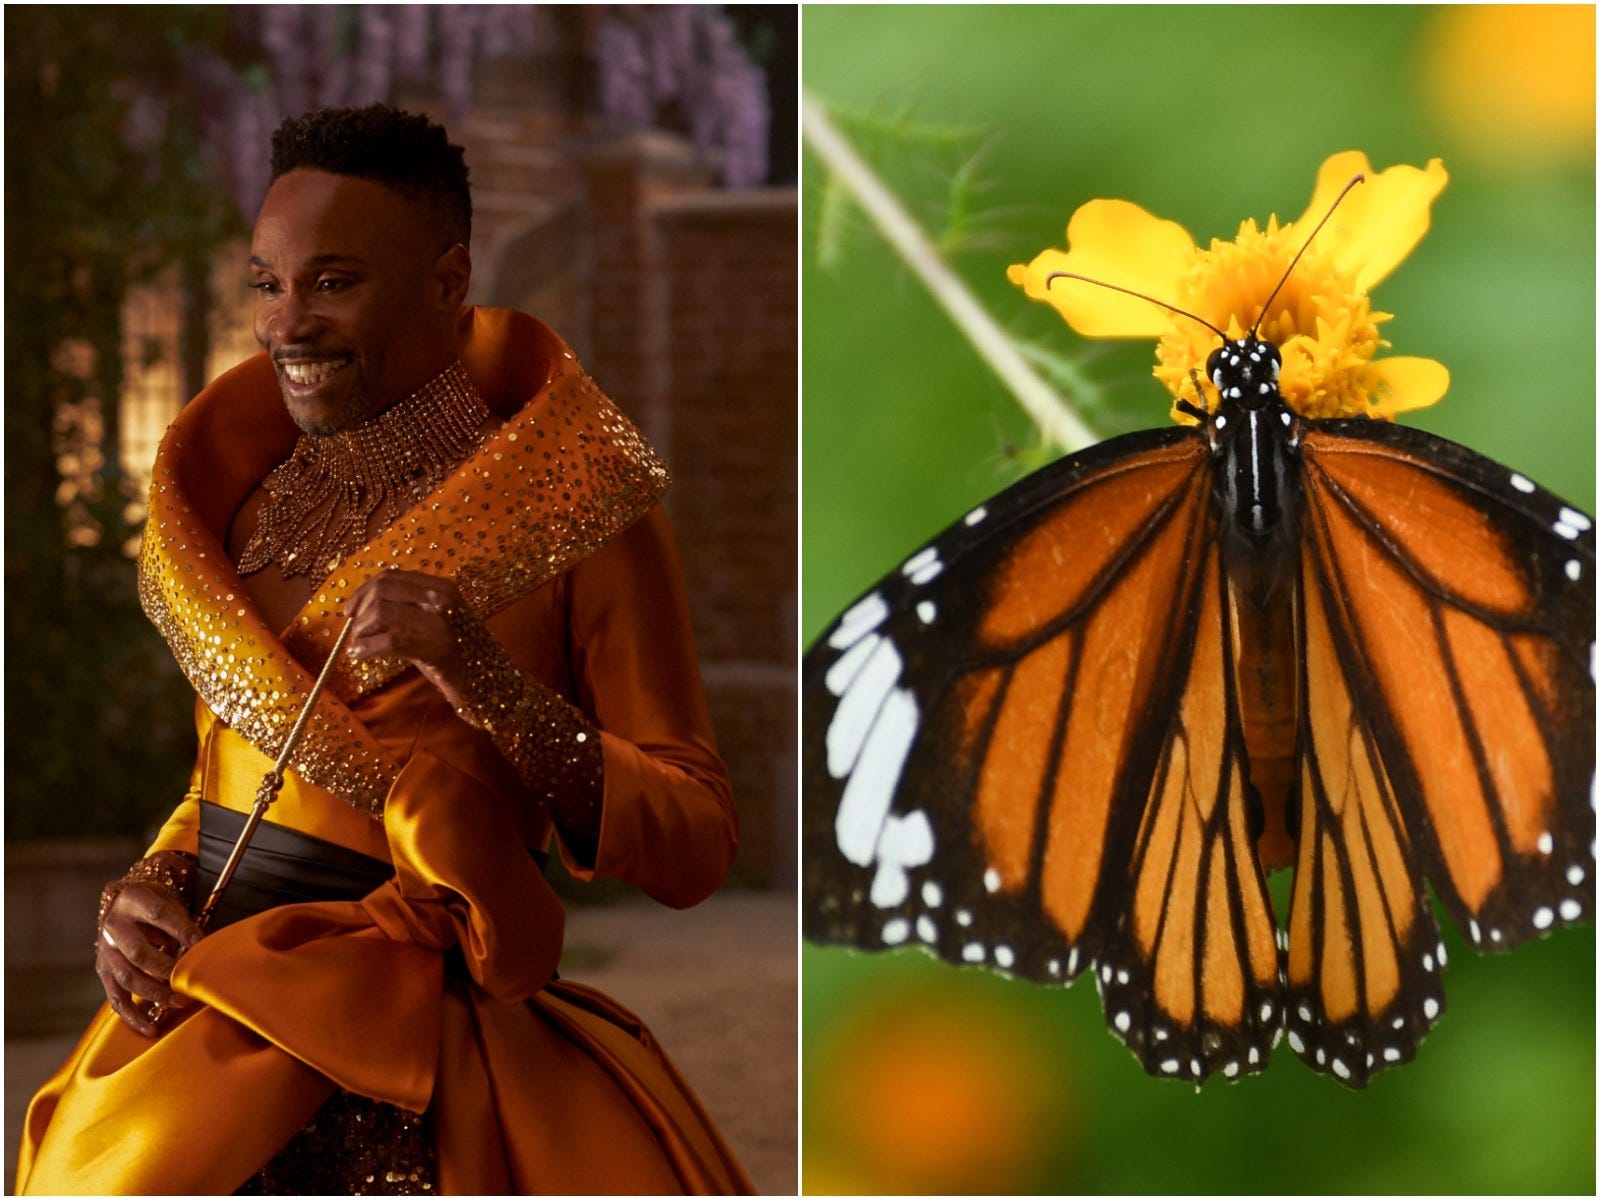 Billy Porter next to a monarch butterfly